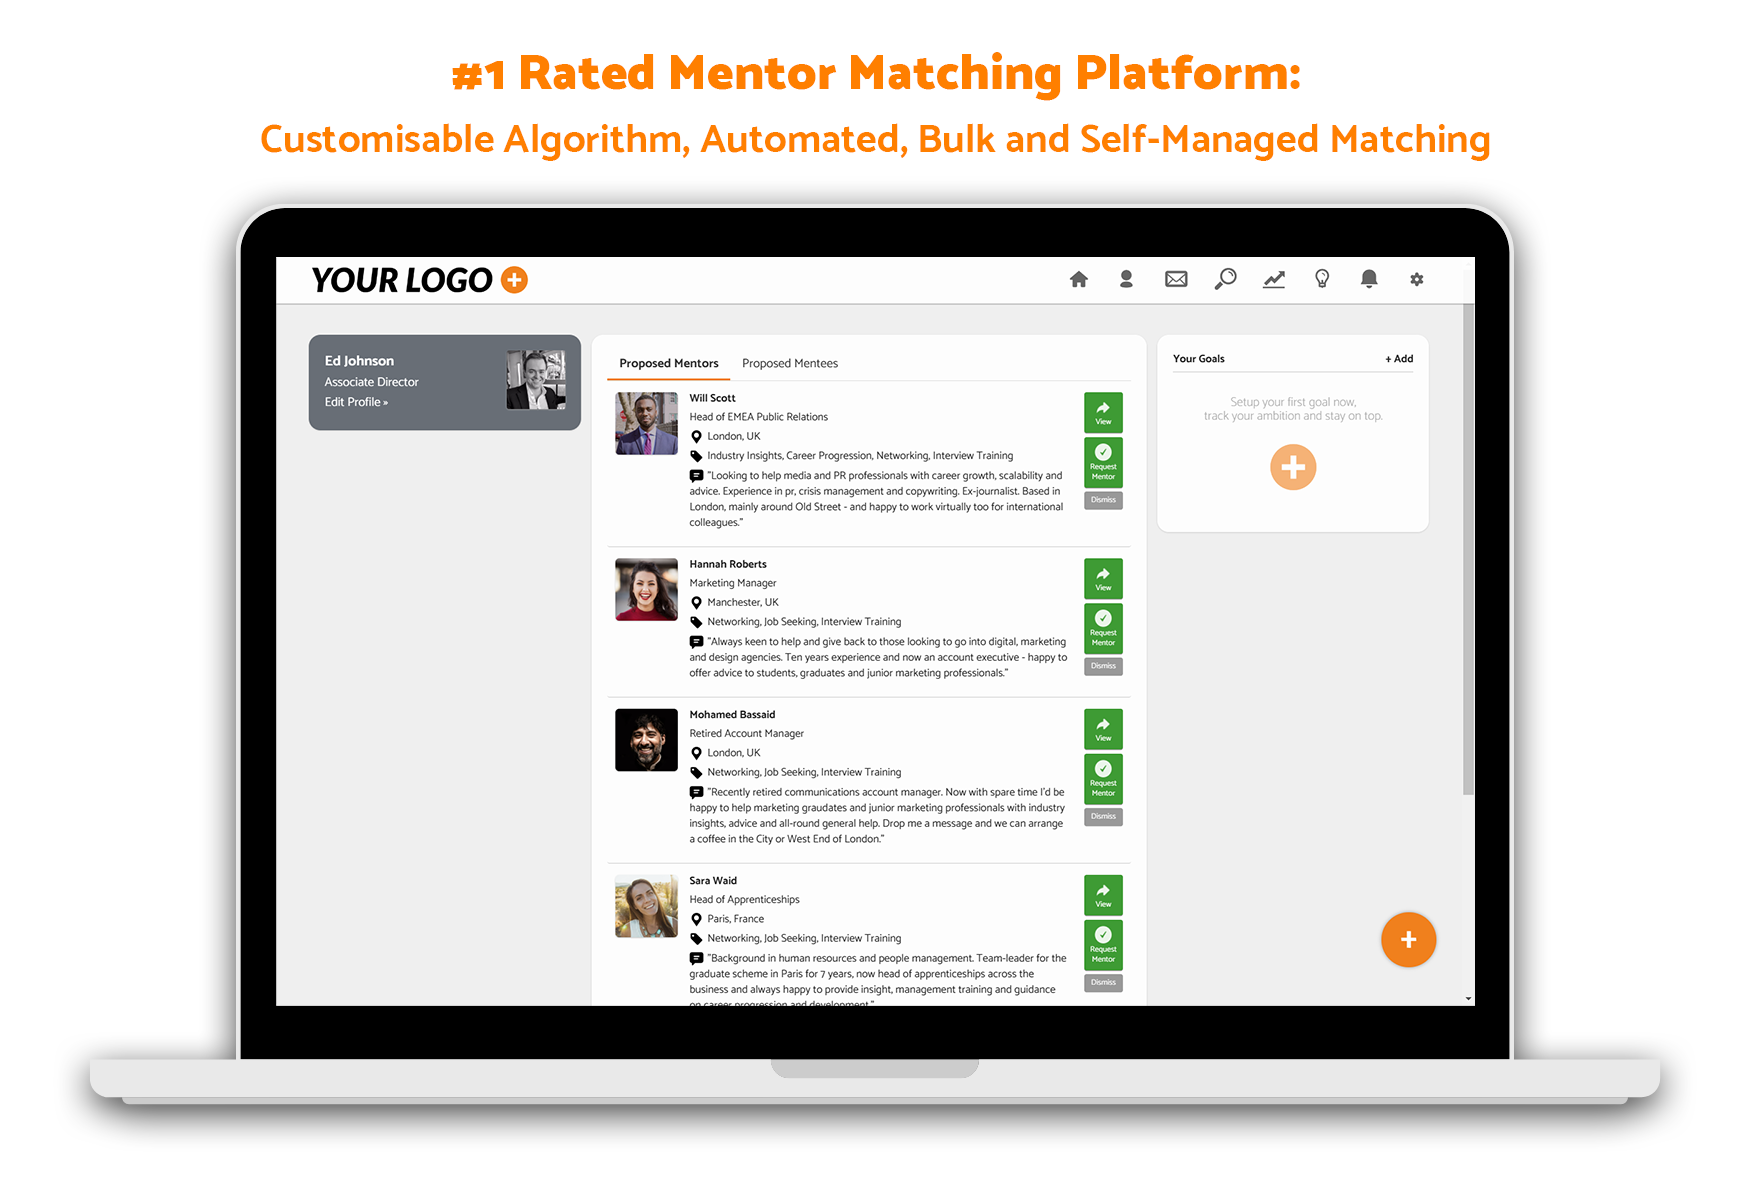 Customisable Mentor Matching Algorithm with Options for Self-Driven Participant Matching, Admin Bulk and Automated Matching and Admin Manual Matching.